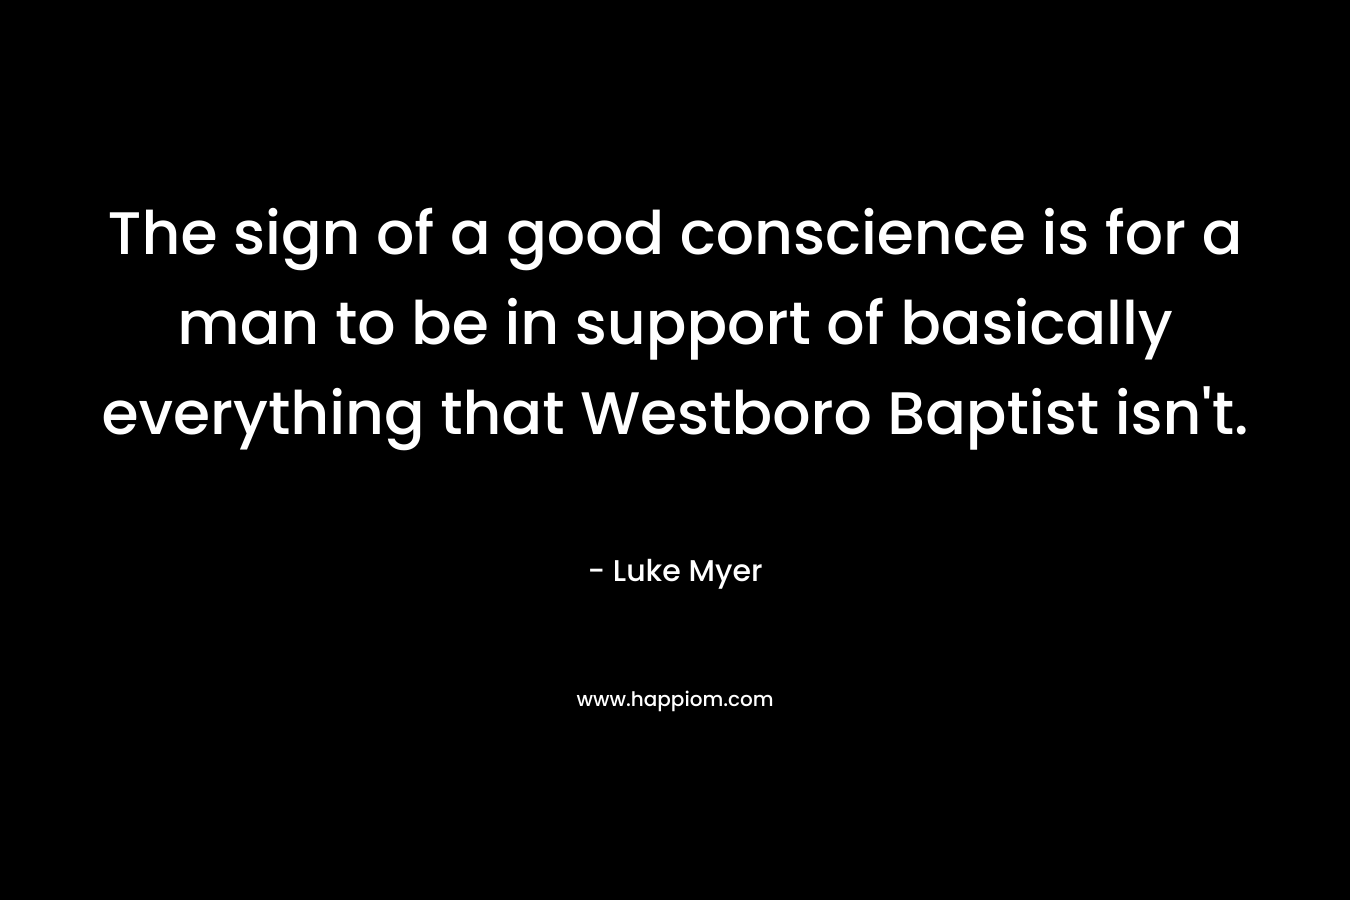 The sign of a good conscience is for a man to be in support of basically everything that Westboro Baptist isn't.